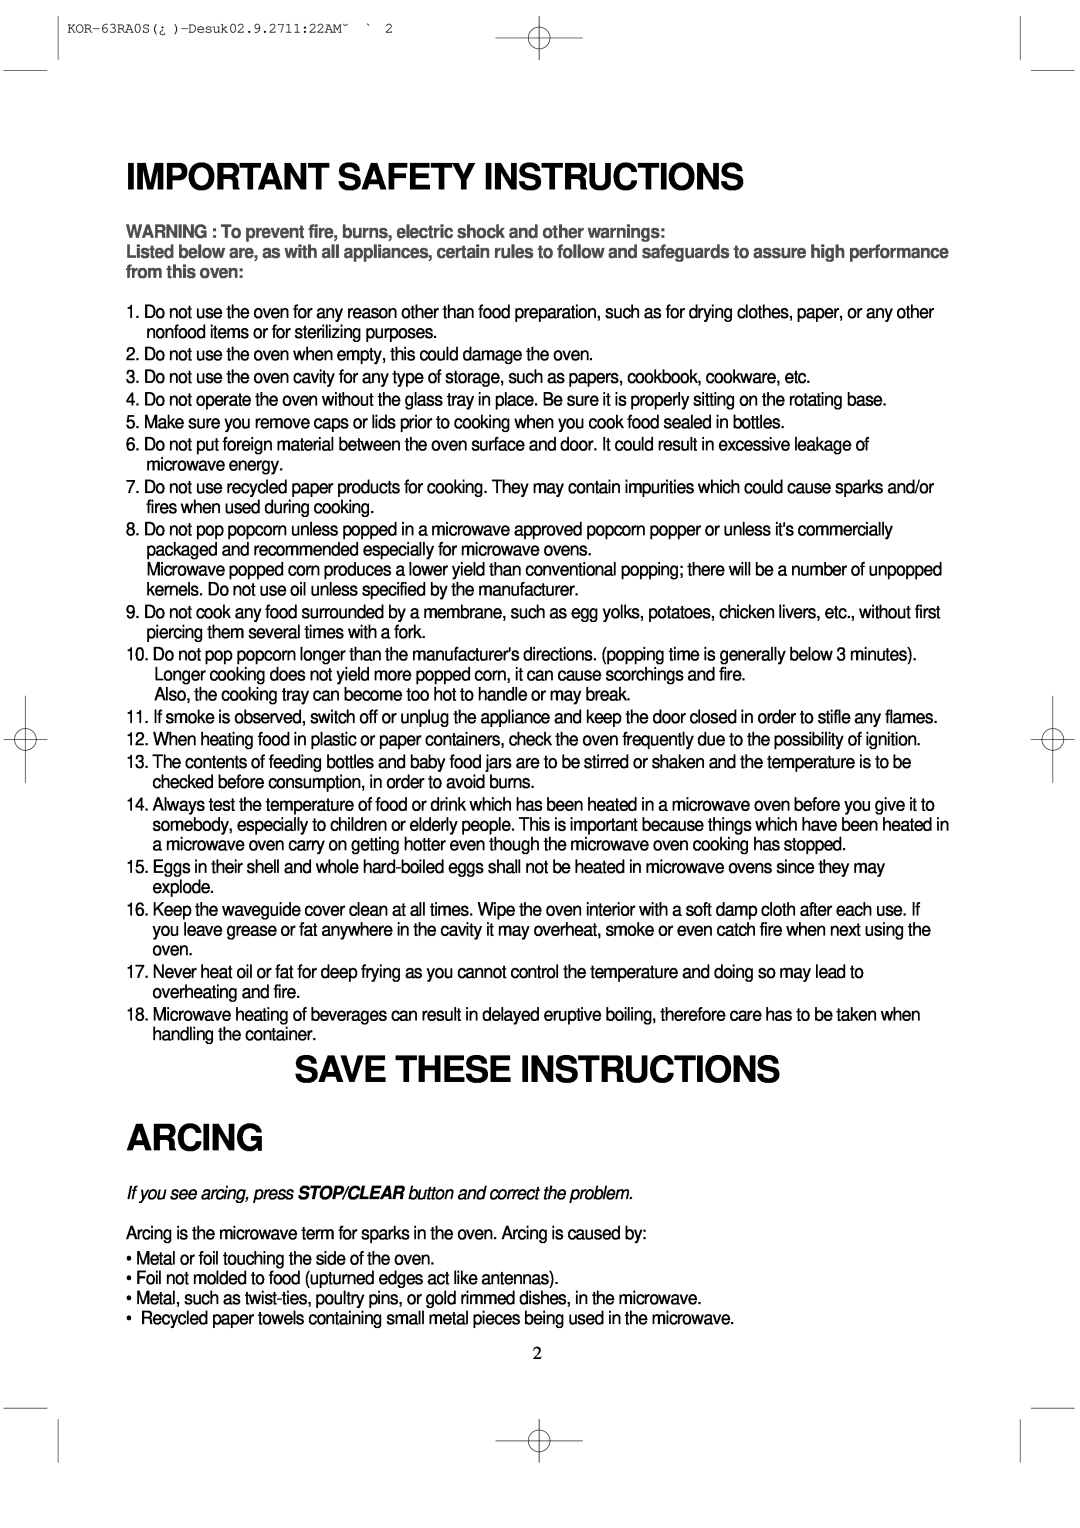 Daewoo KOR-63RA manual Important Safety Instructions, Save These Instructions Arcing 